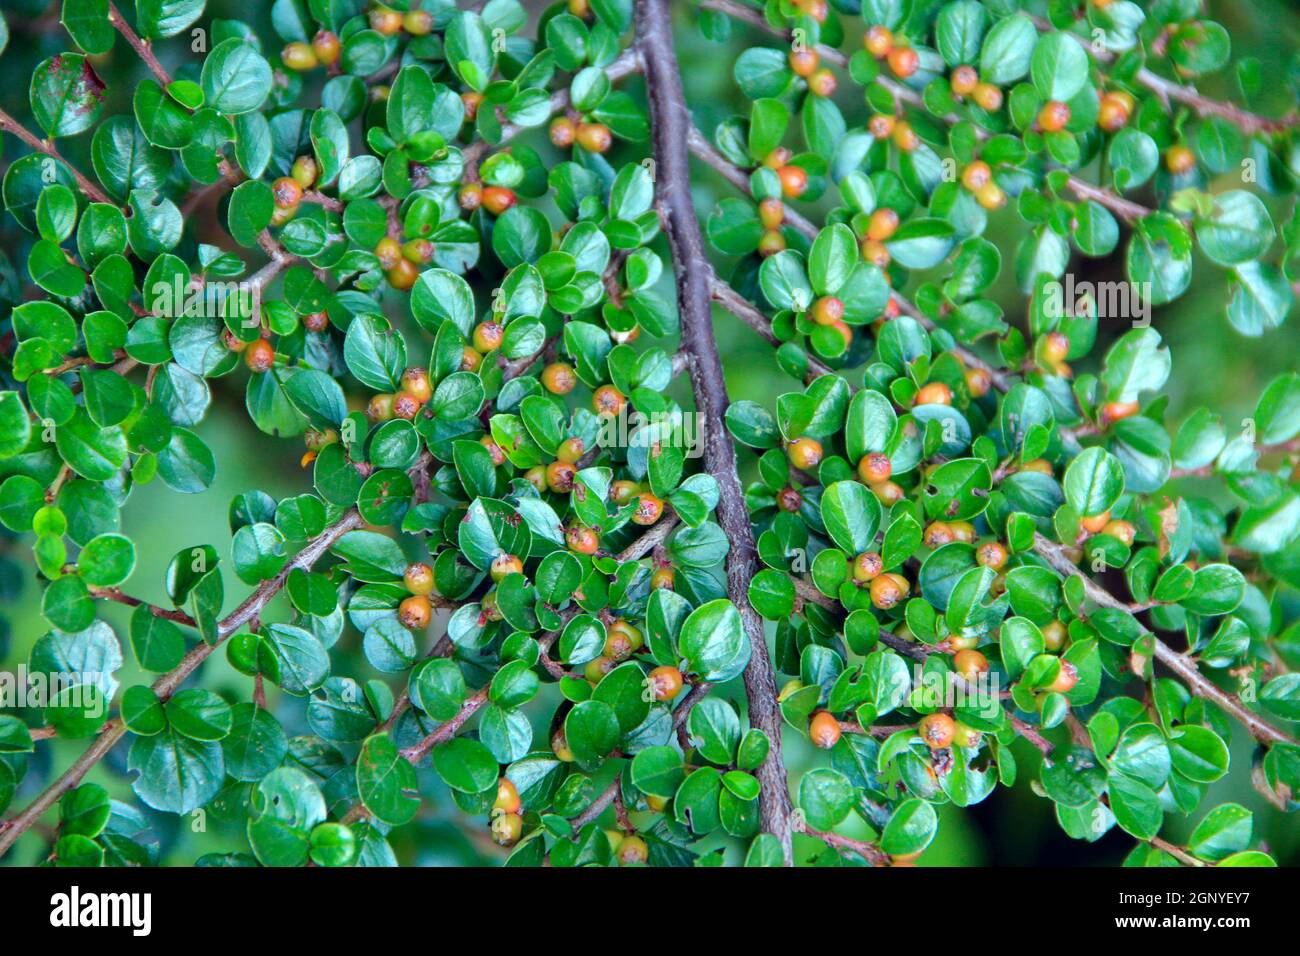 Cotoneaster horizontalis Decne. Texture from green leaves of Cotoneaster. Foliage and unripe berries of Cotoneaster. Branch of plant with green leaves Stock Photo